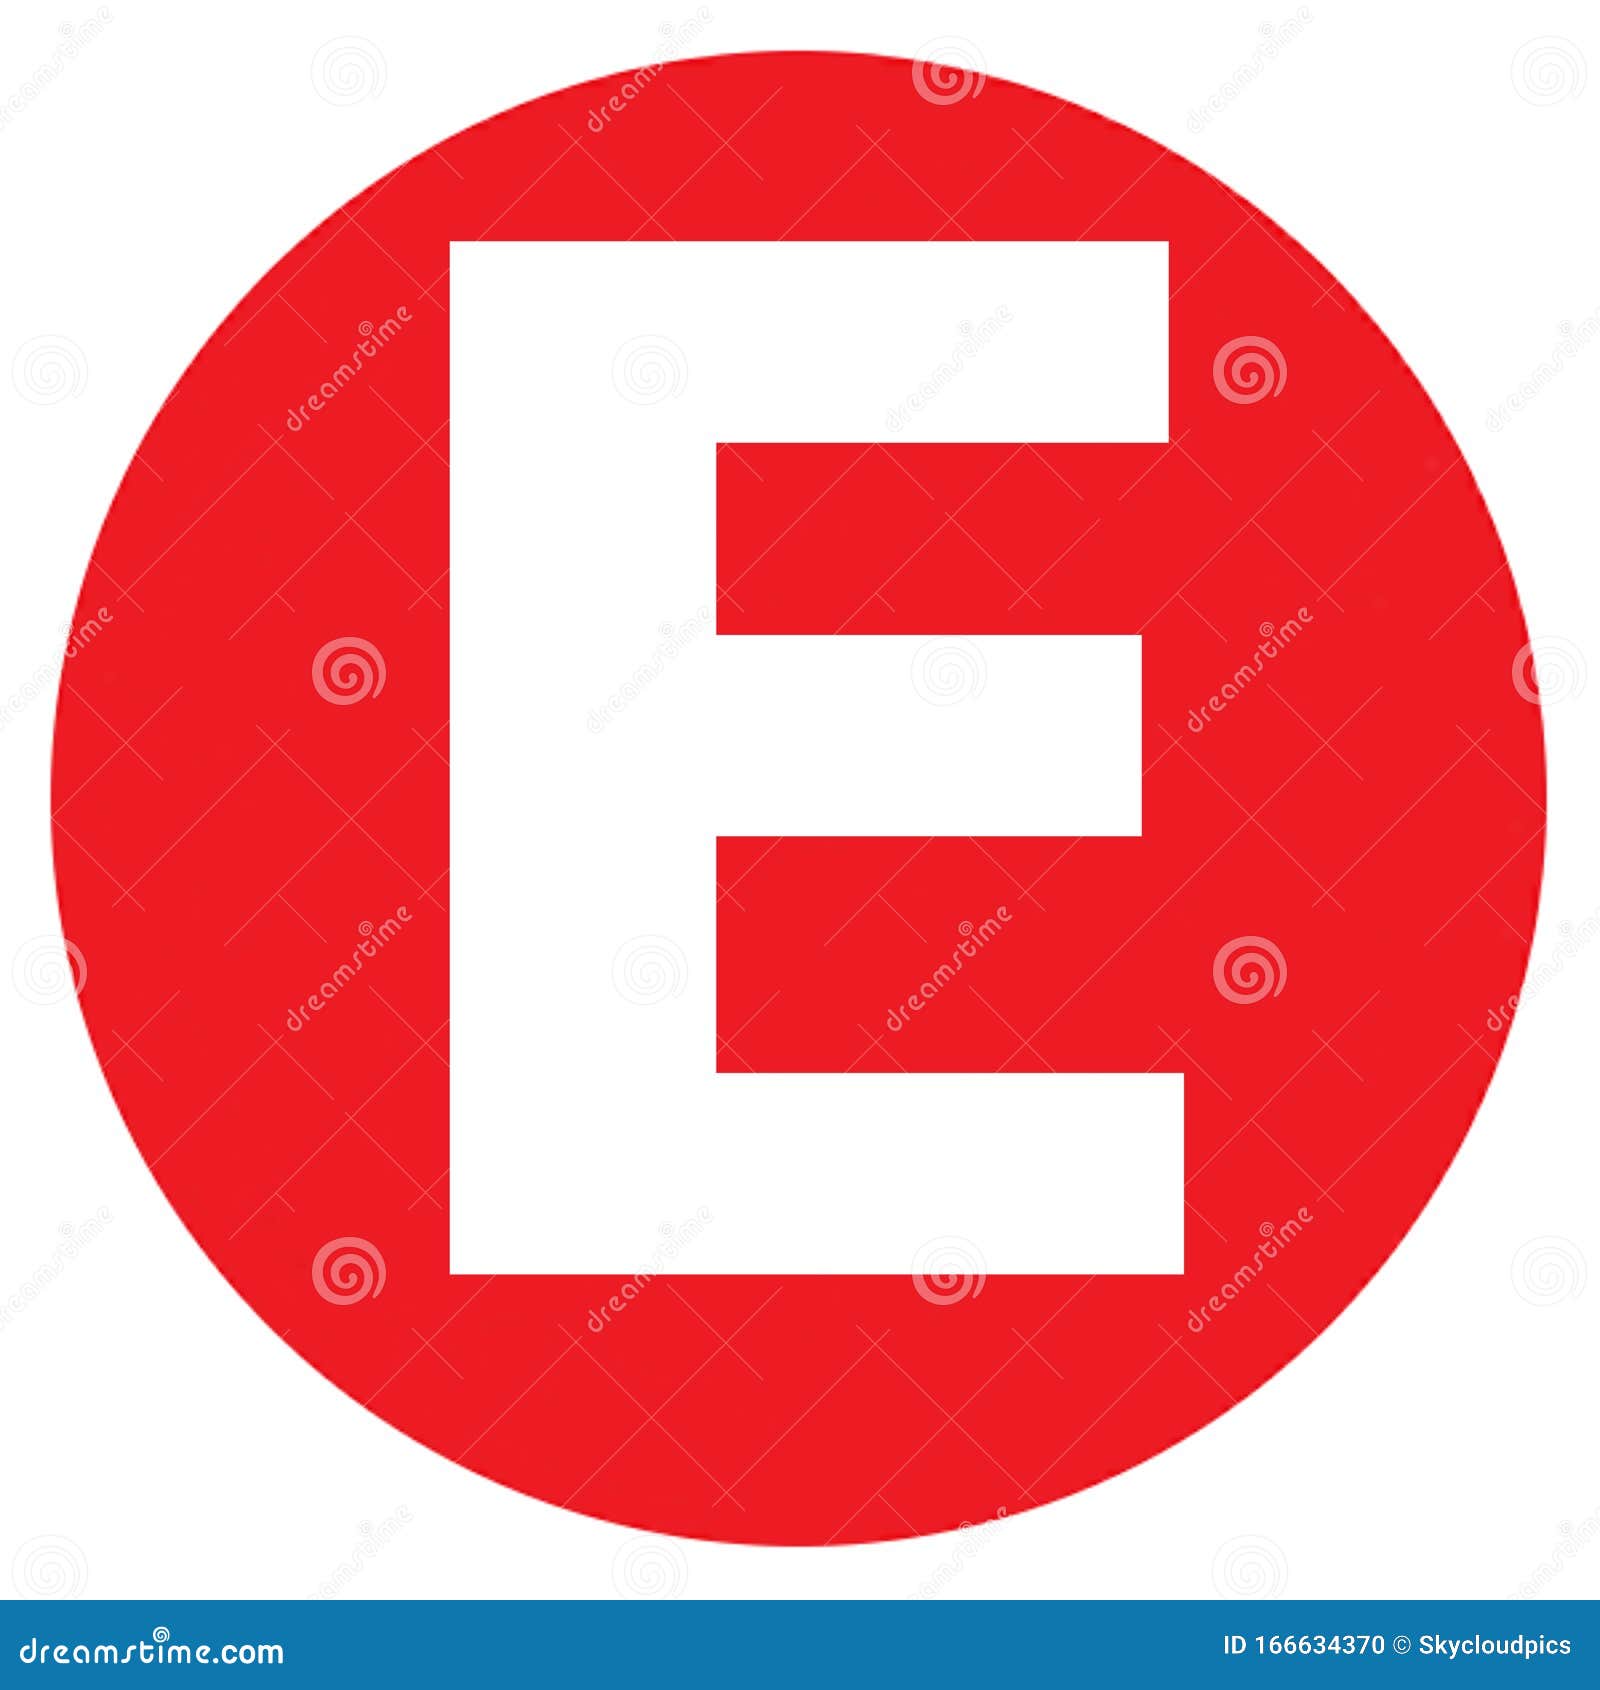 https://thumbs.dreamstime.com/z/letter-e-big-red-dot-letters-numbers-d-white-capitalized-font-round-circular-background-up-to-pixels-166634370.jpg